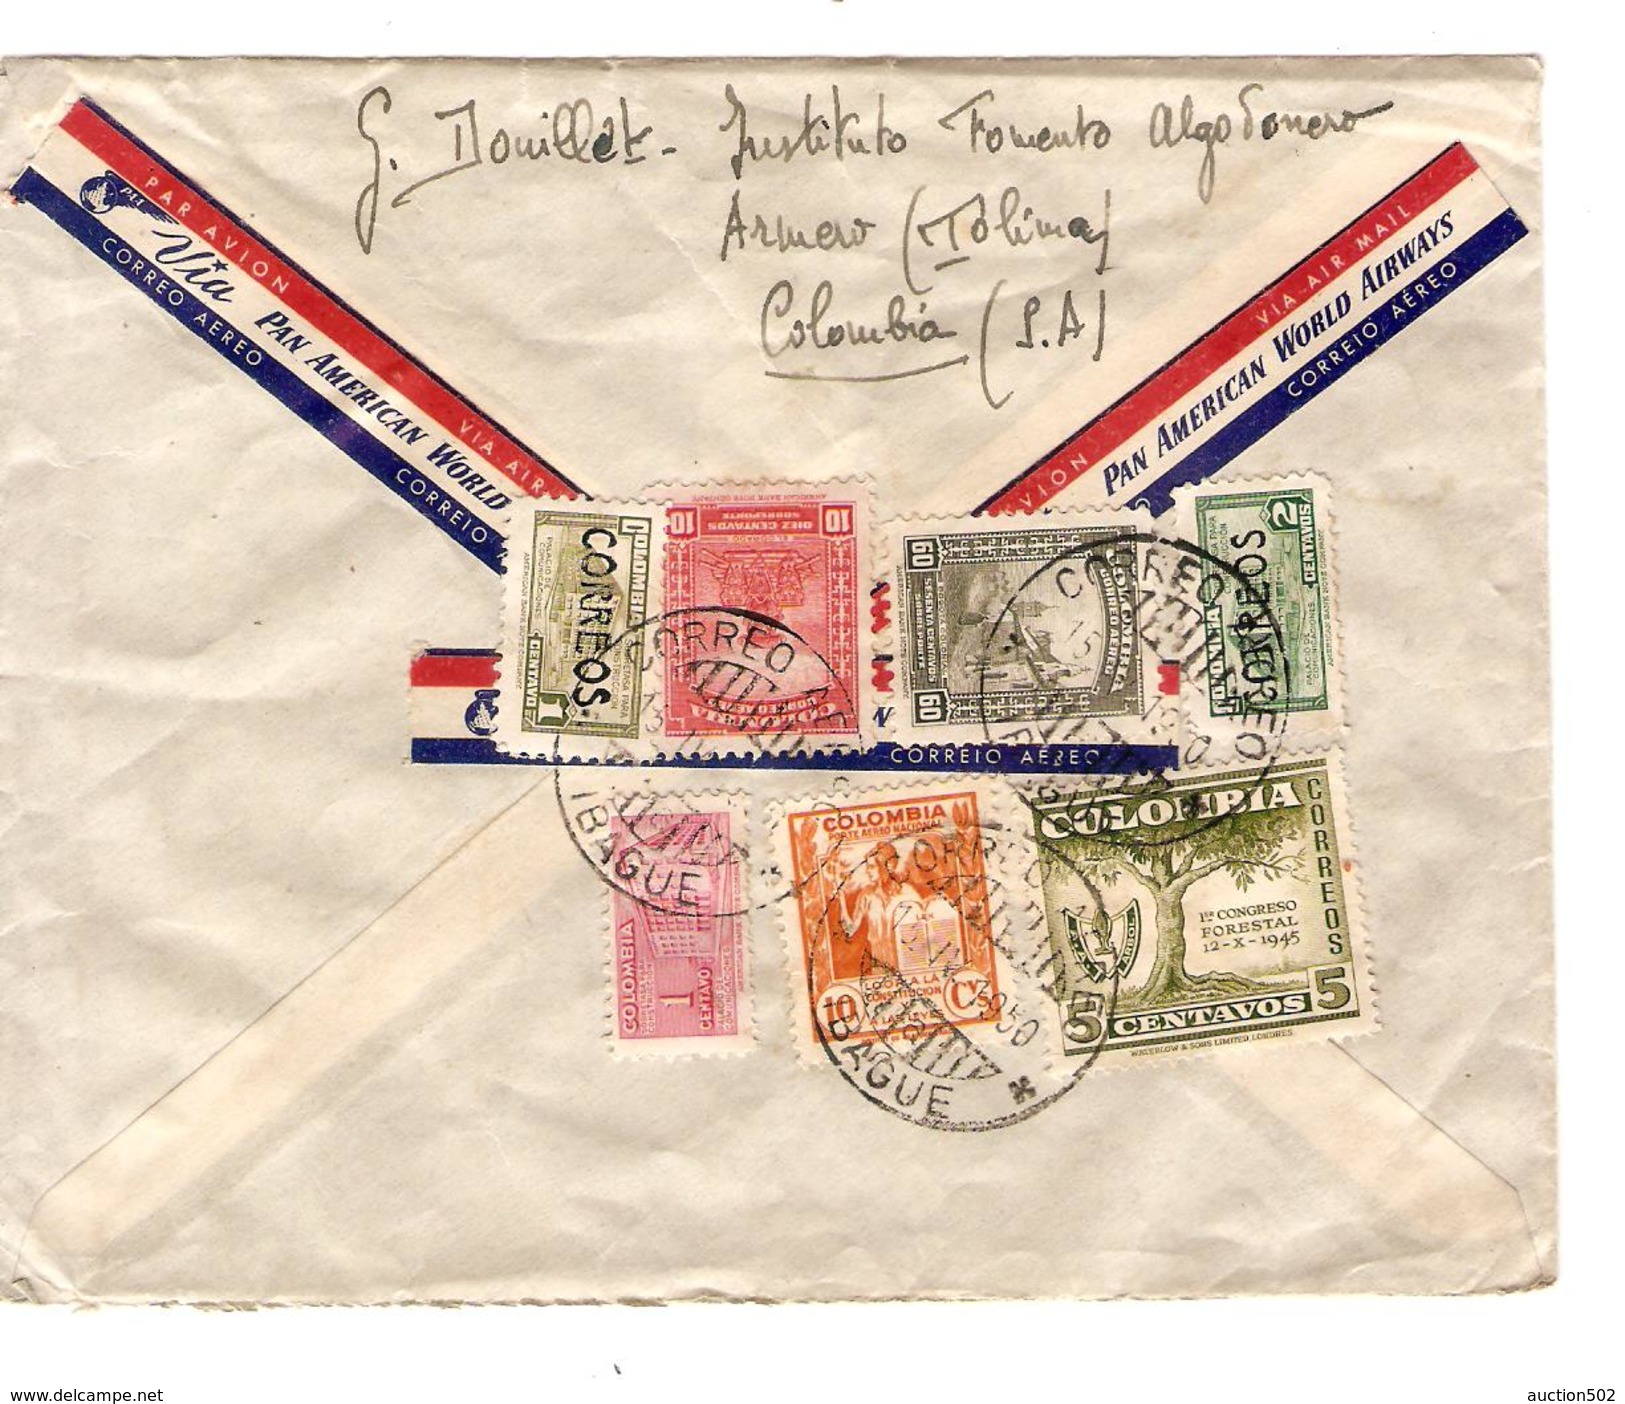 Columbia-Colombie Air Mail Cover C.Ibague 15/4/1950 To Belgium PR4615 - Colombia